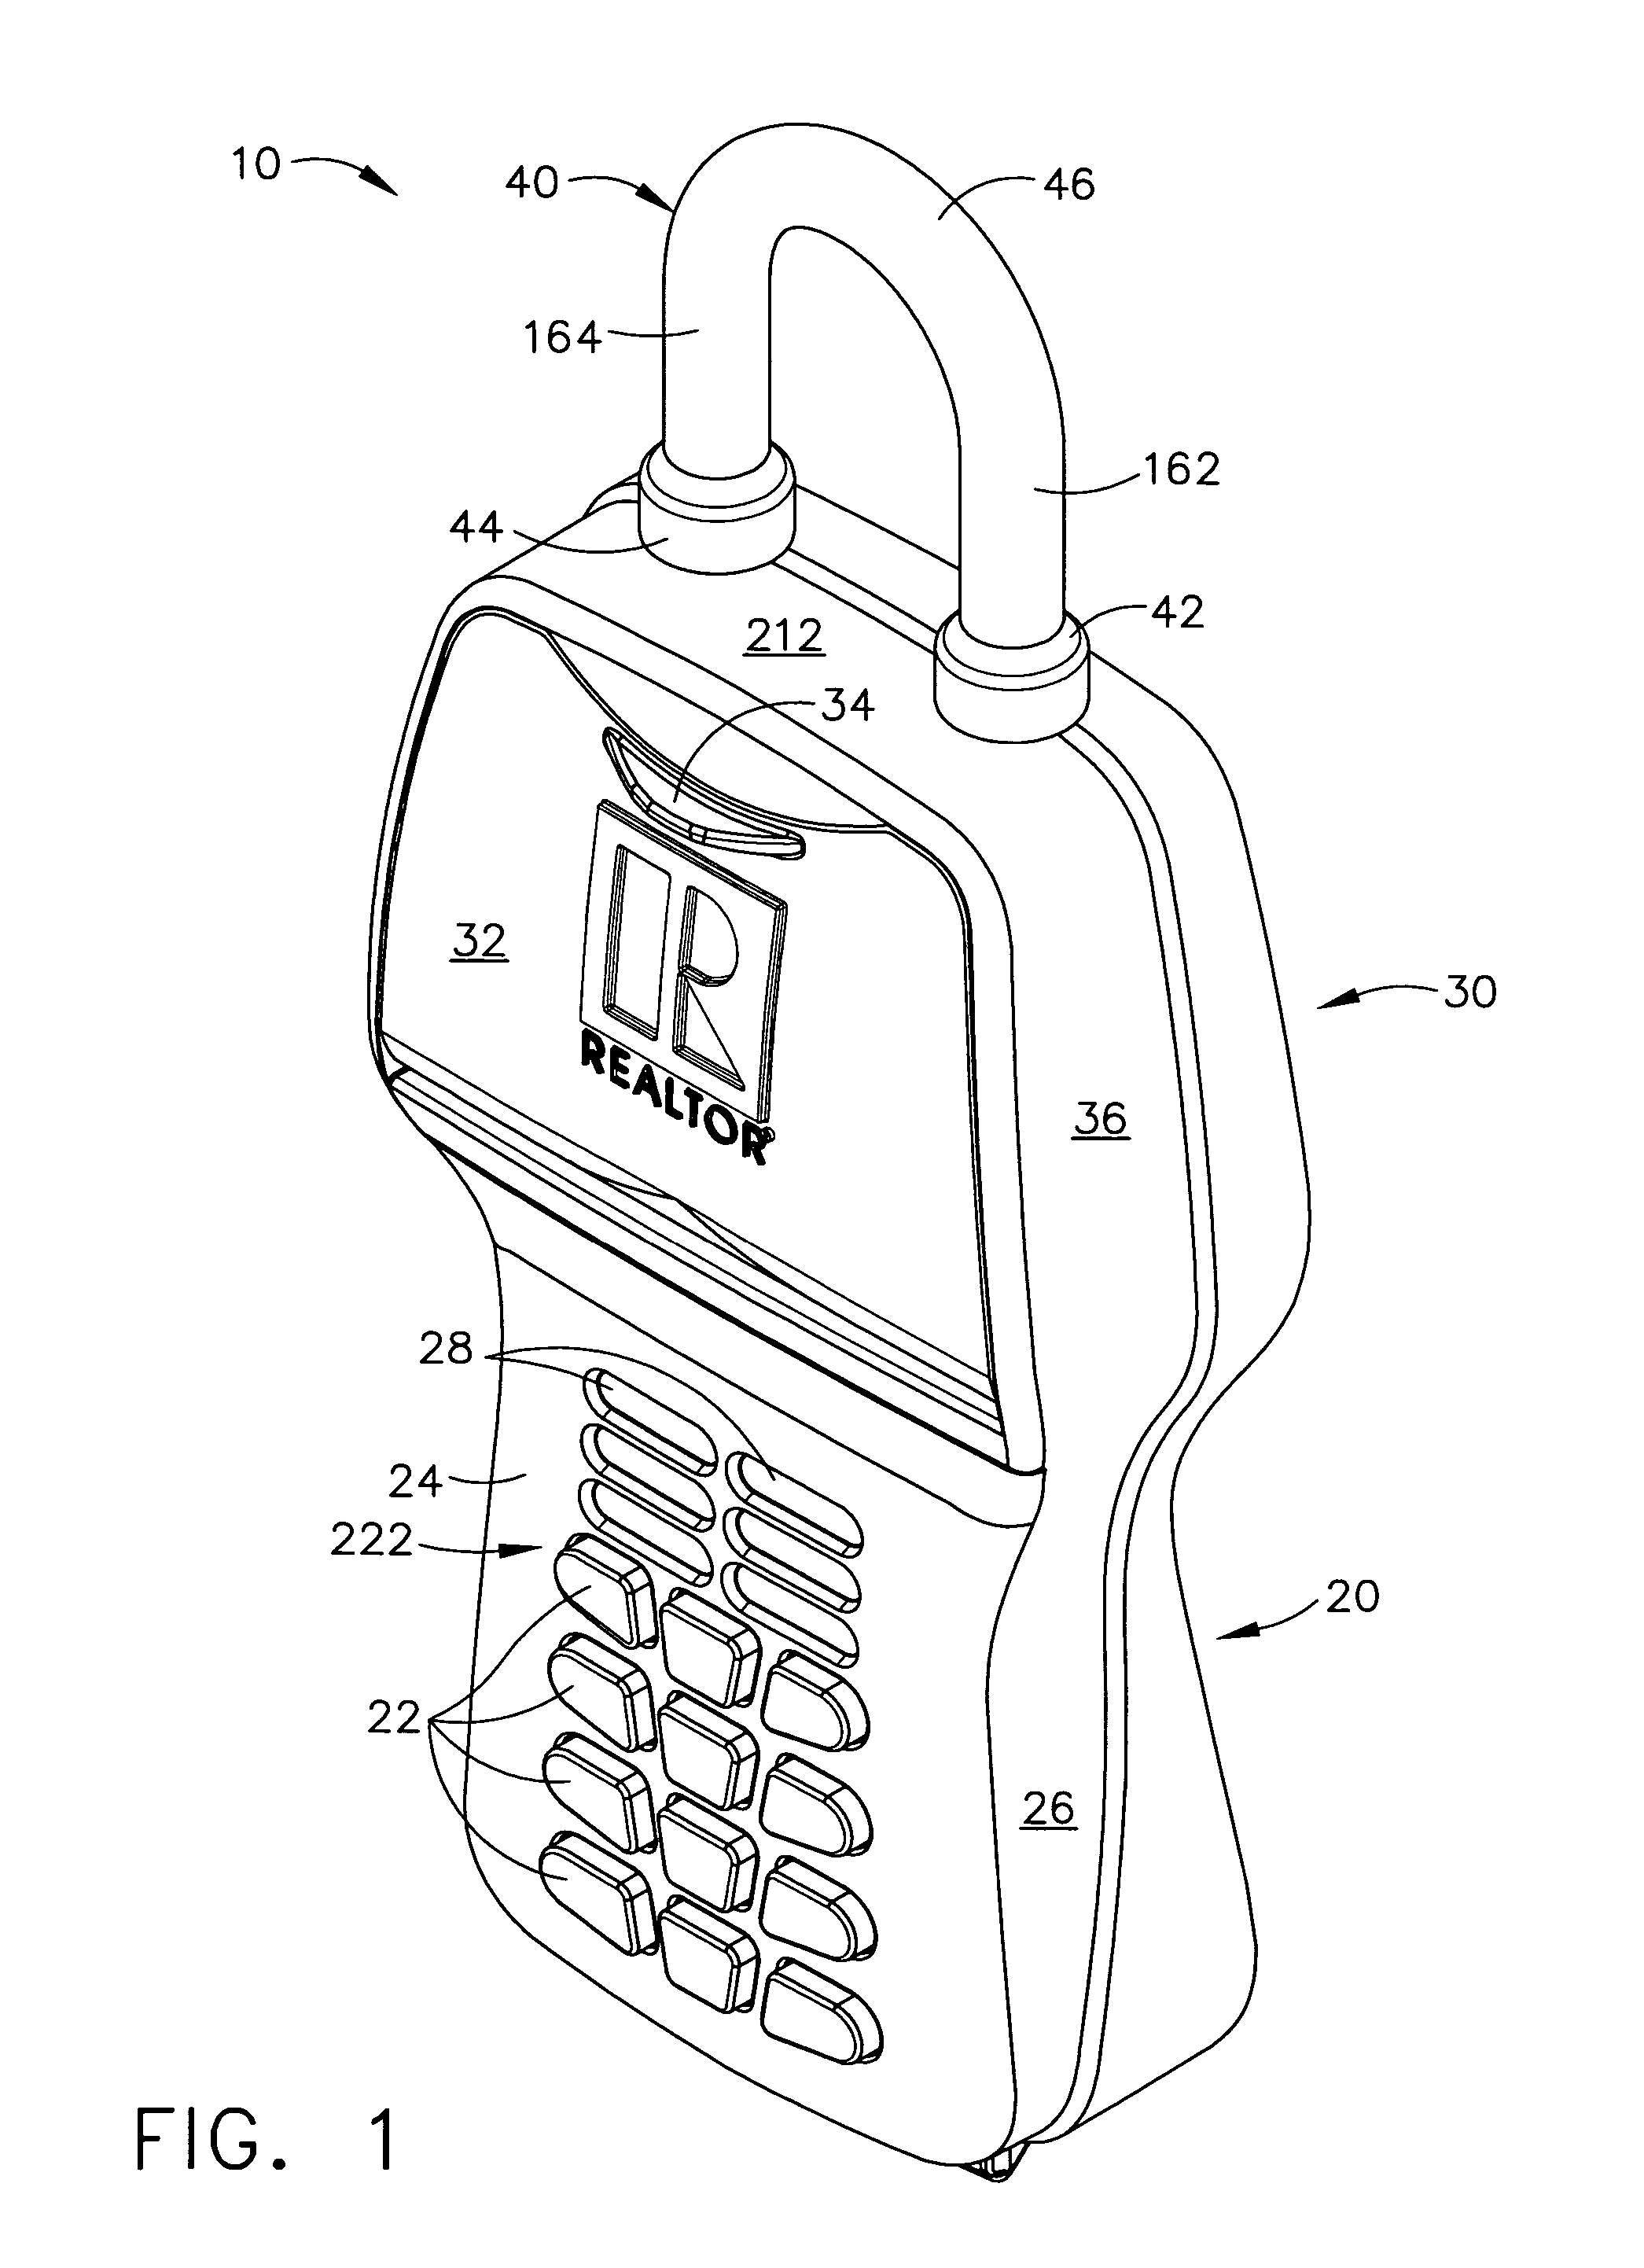 Electronic lock box with single linear actuator operating two different latching mechanisms